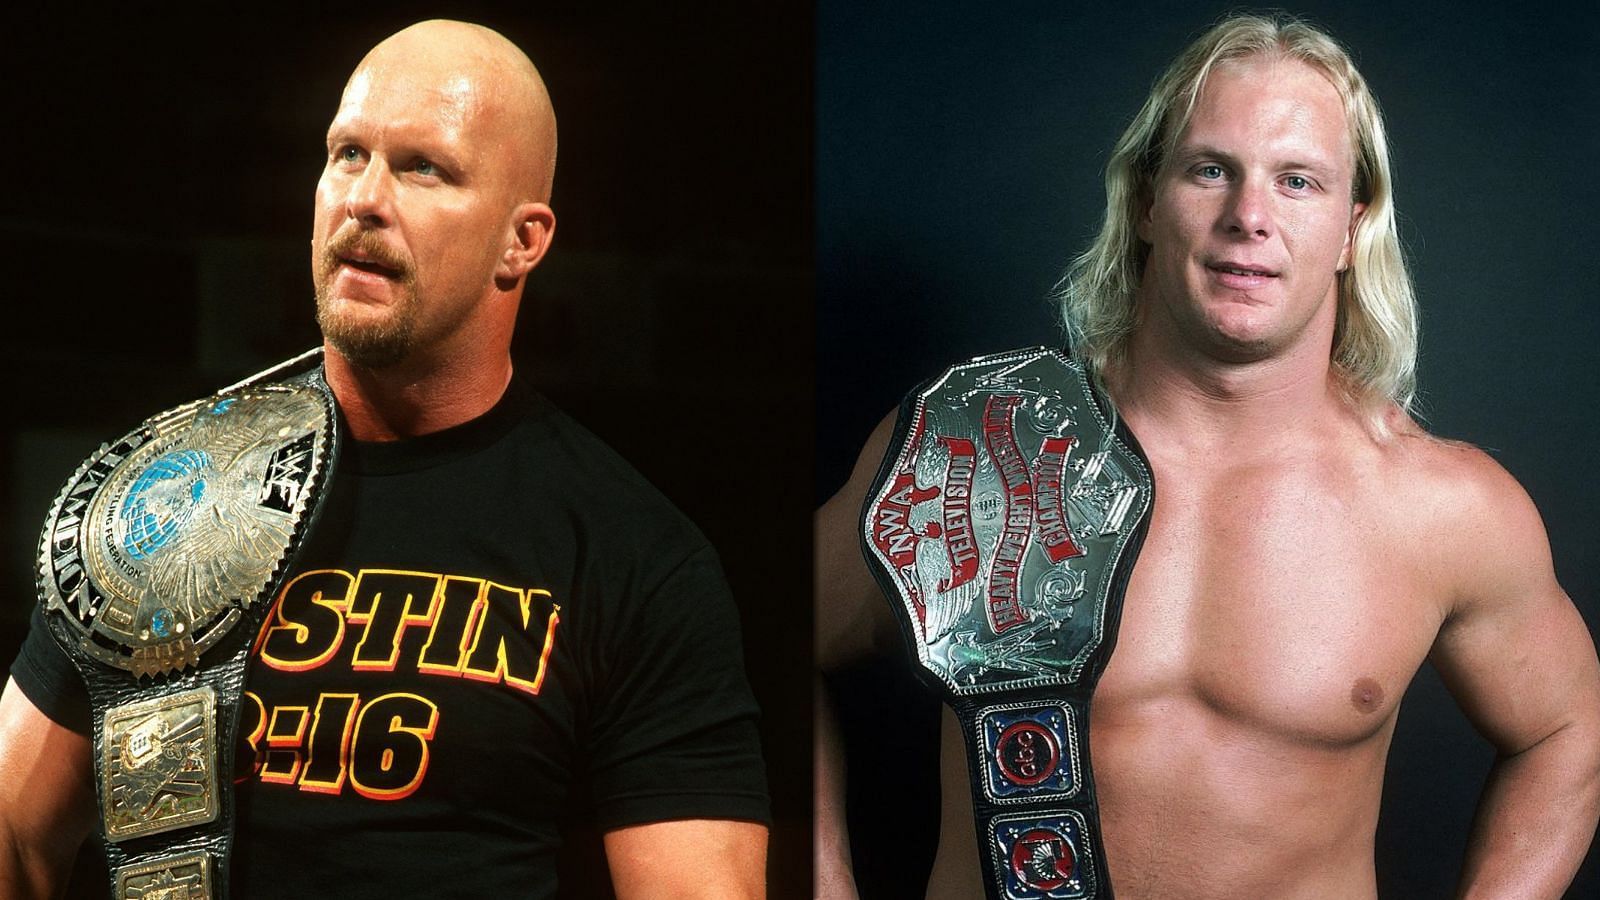 Stone Cold has had quite a career